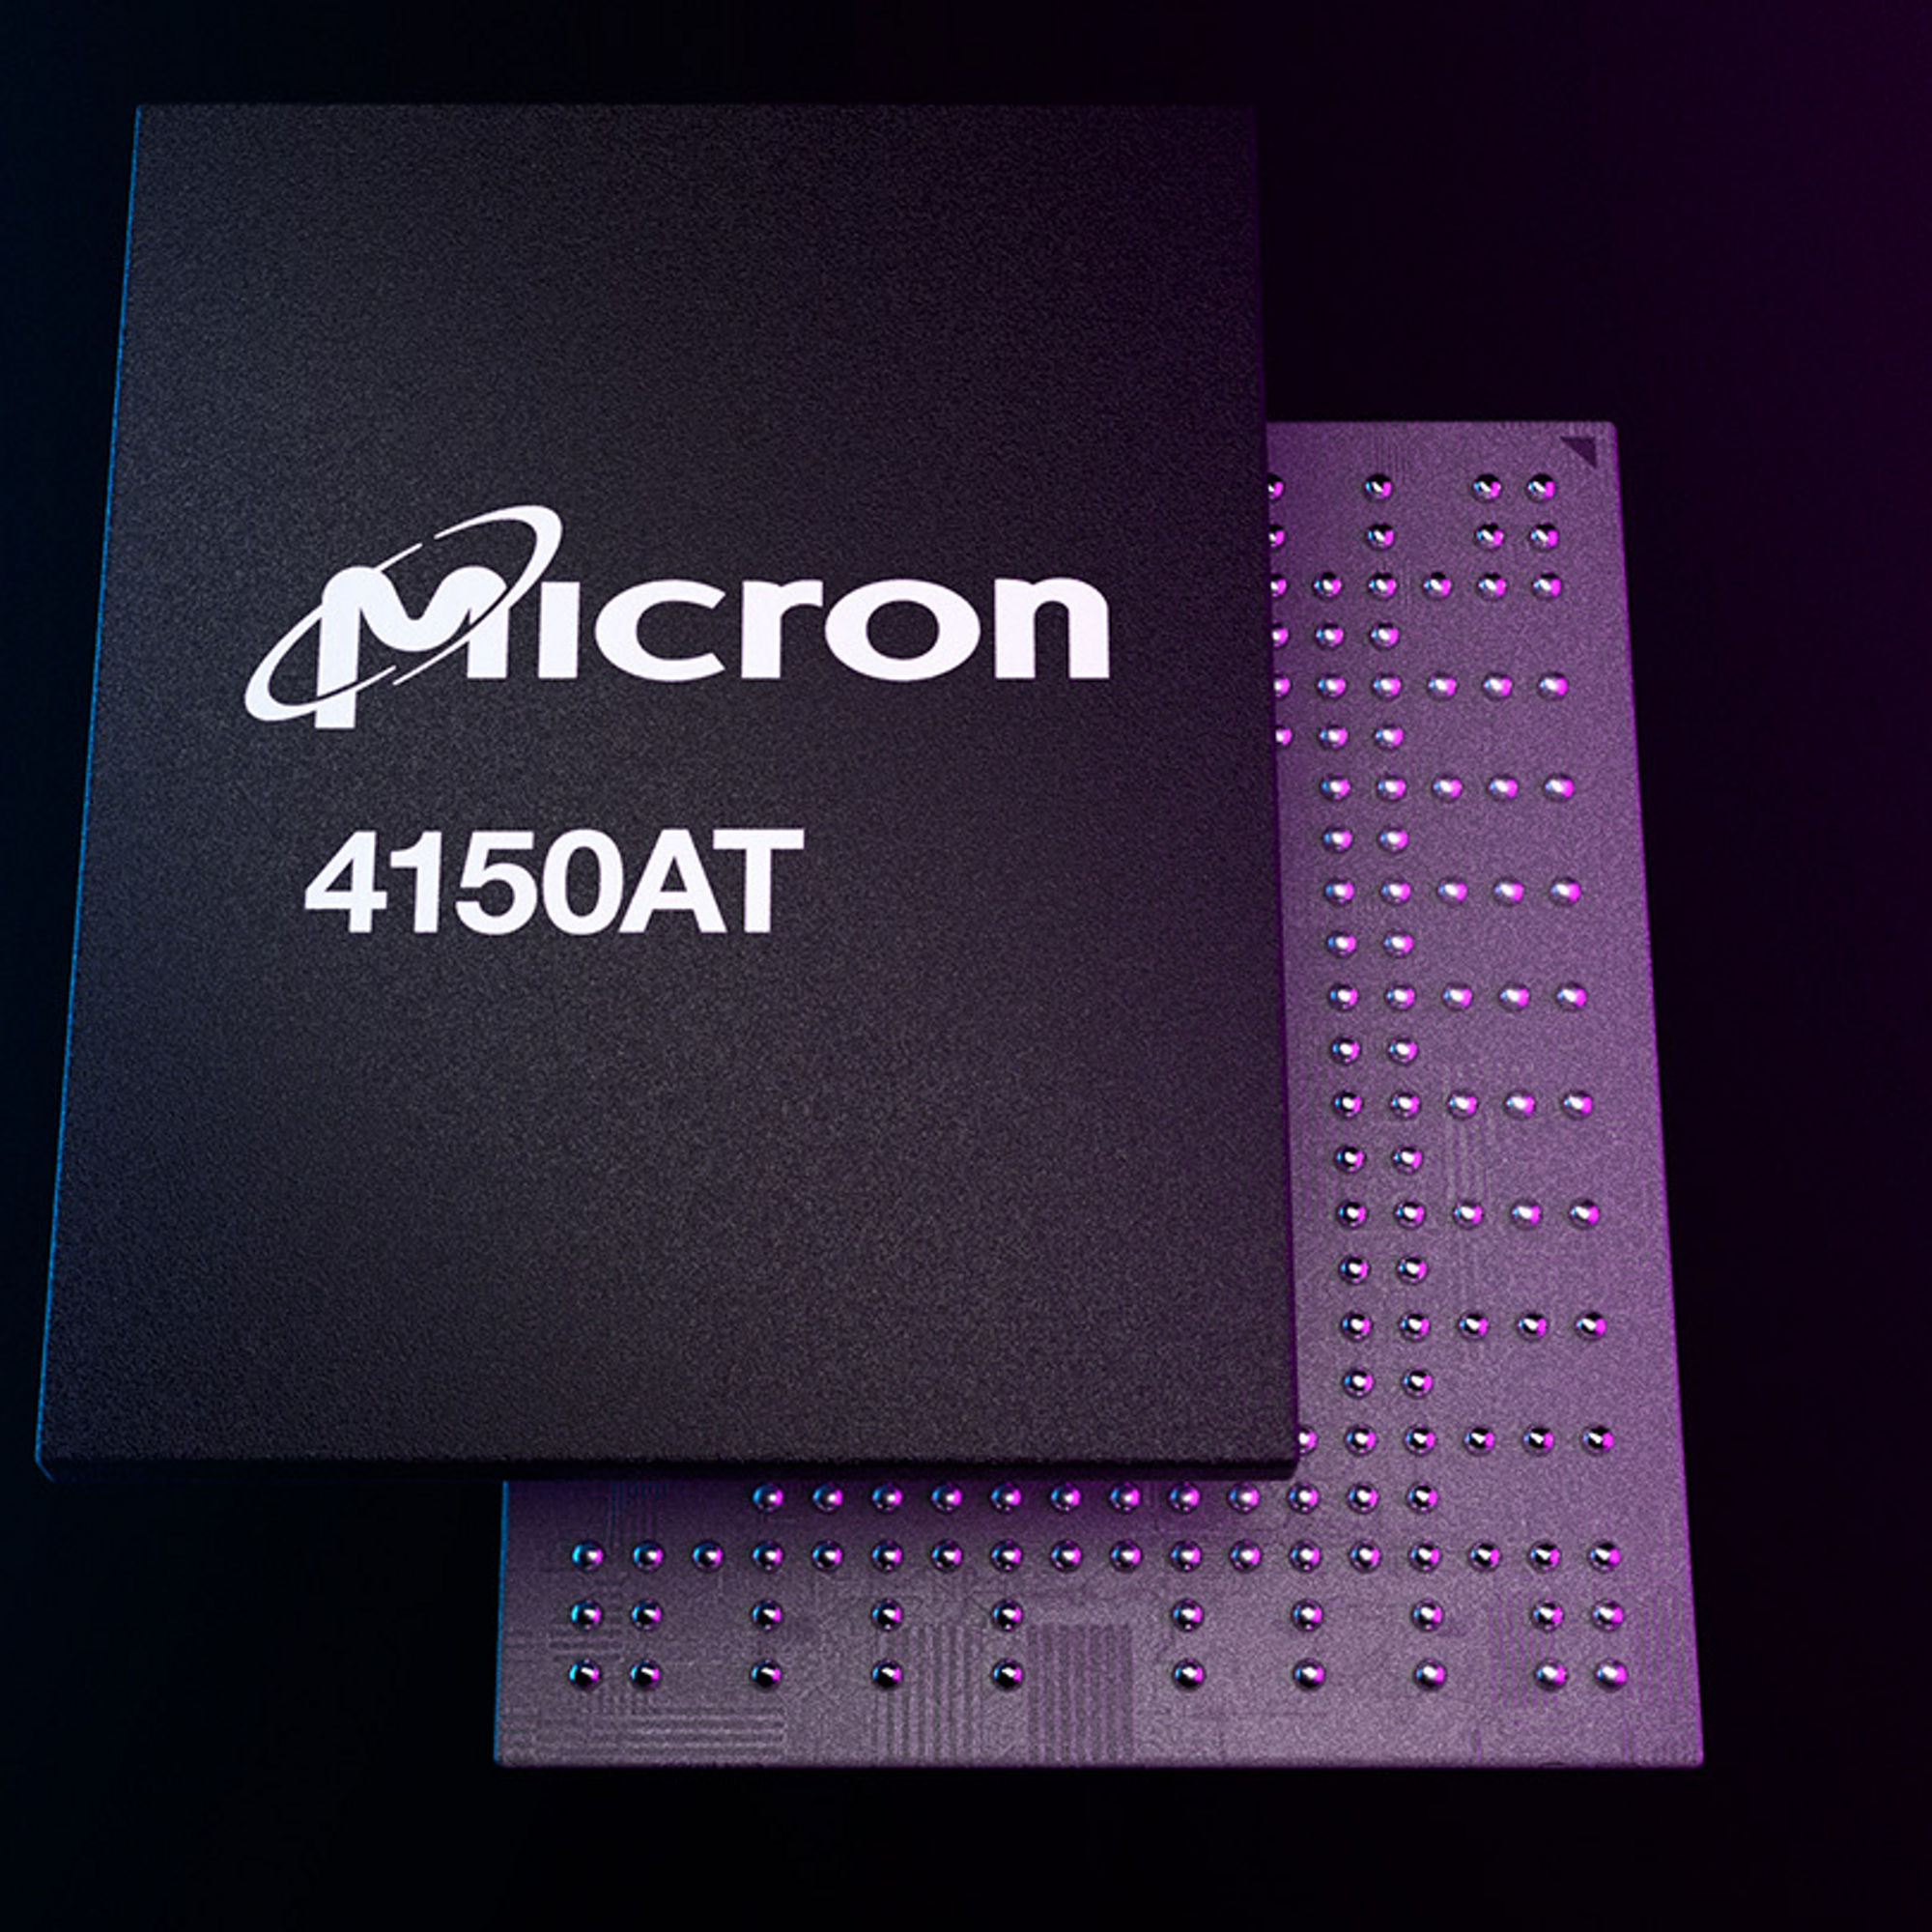 Micron 4150AT front and back